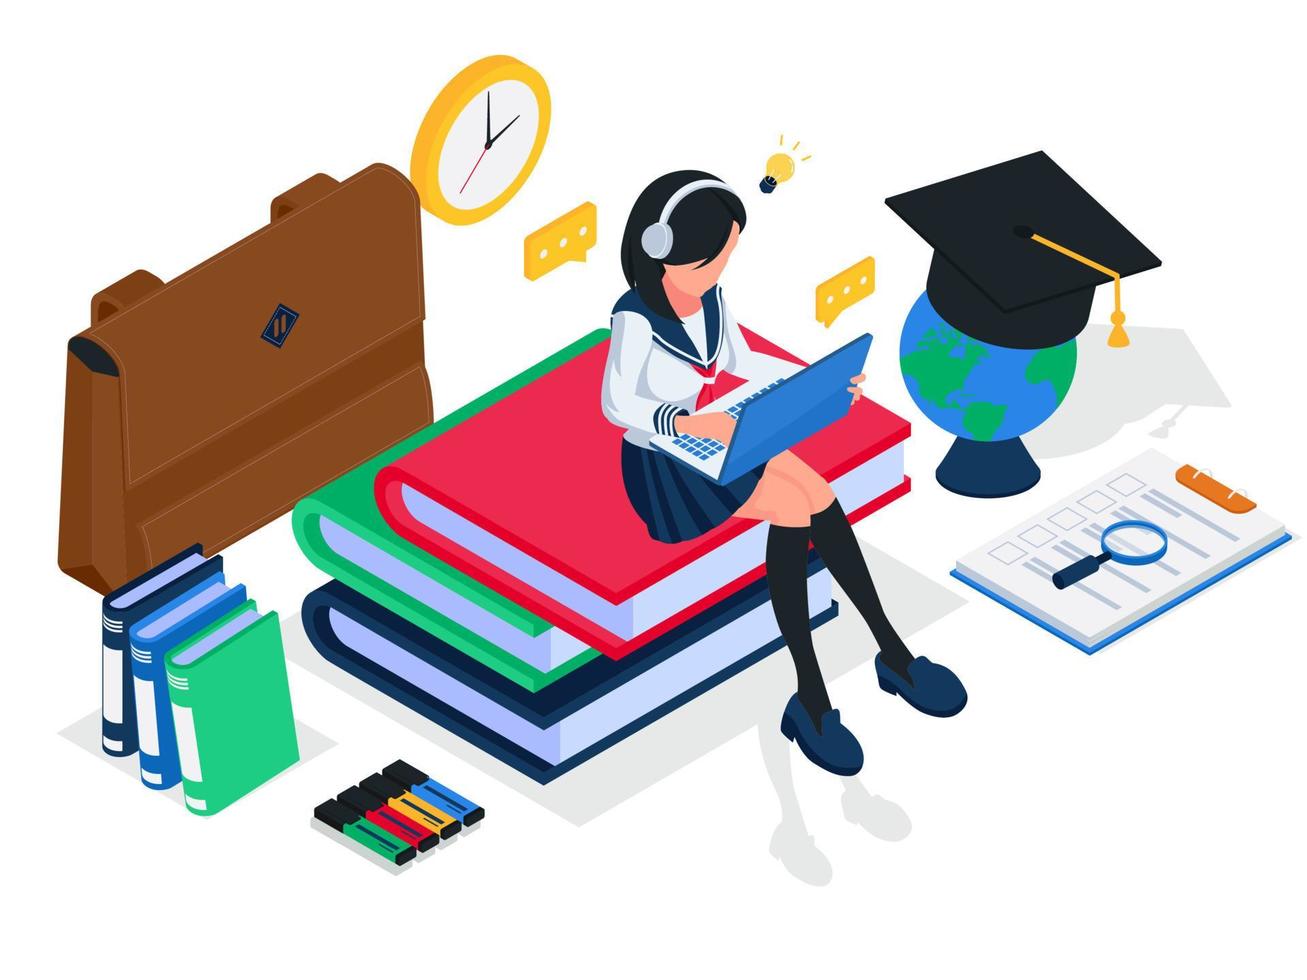 Female student listening audiobook from laptop and sit on stack of books, isometric e-learning illustration concept. Female with laptop, headphone, books, globe, bag, graduation cap, Vector